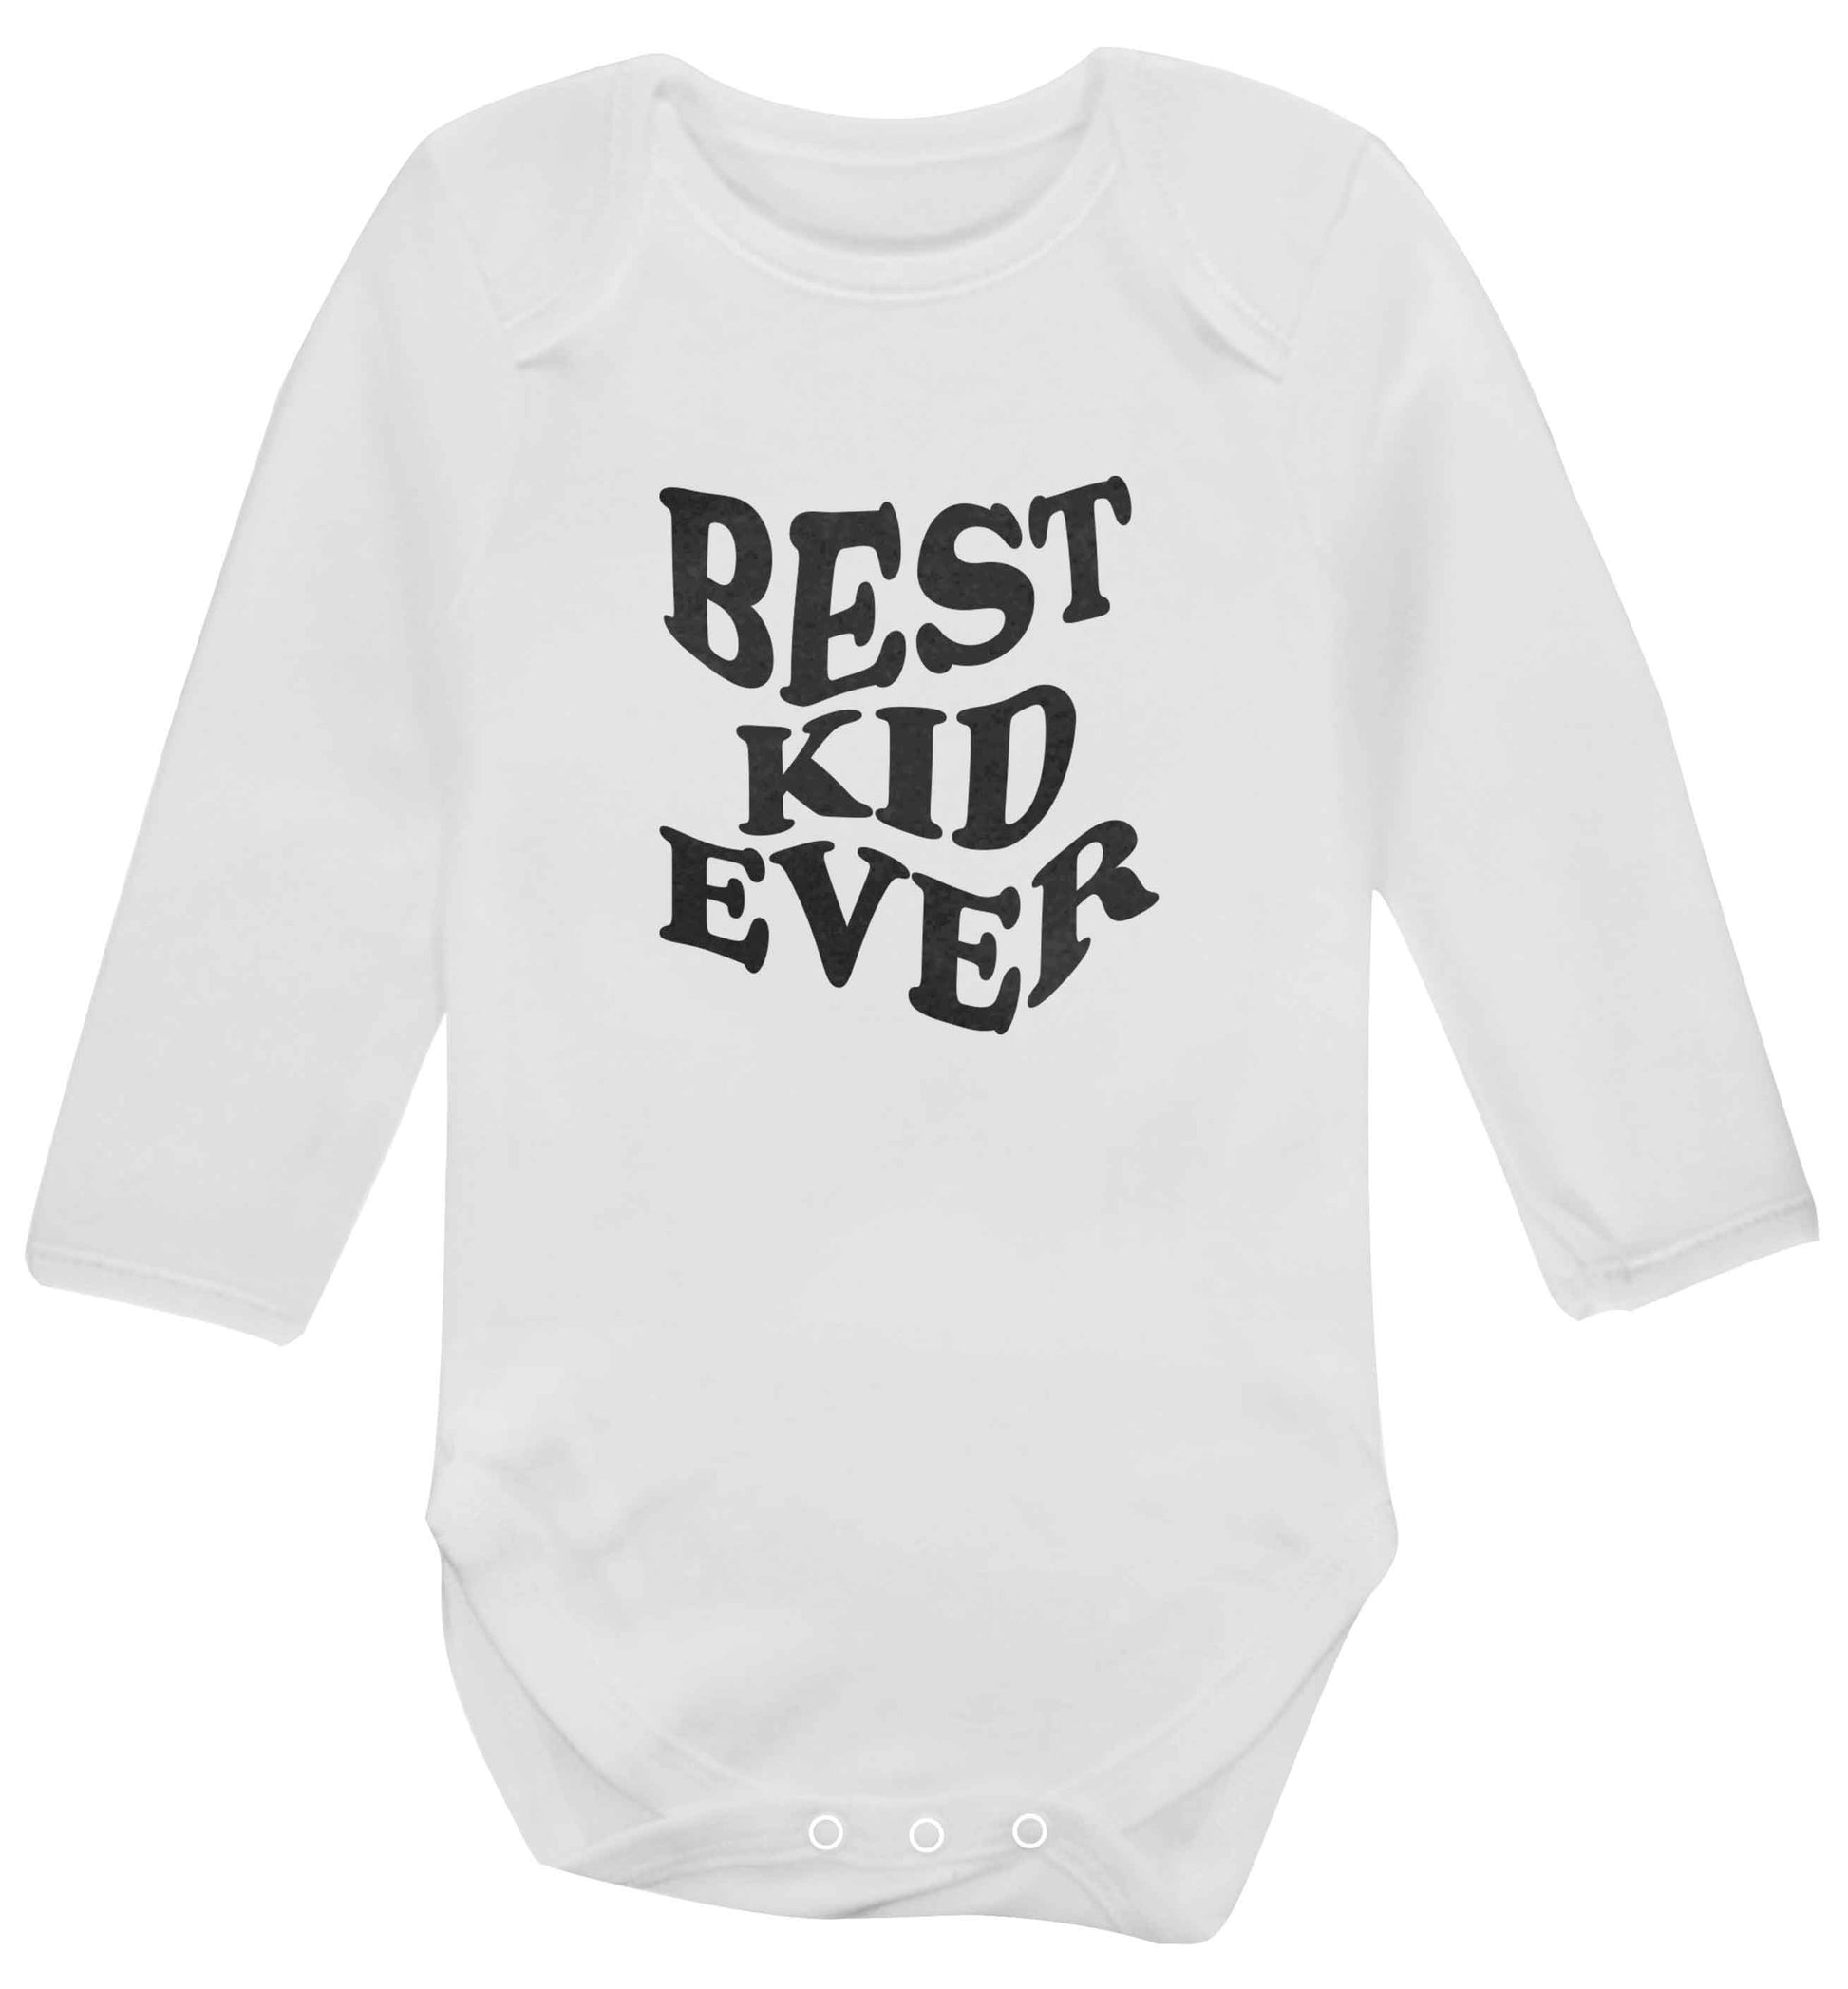 Best kid ever baby vest long sleeved white 6-12 months